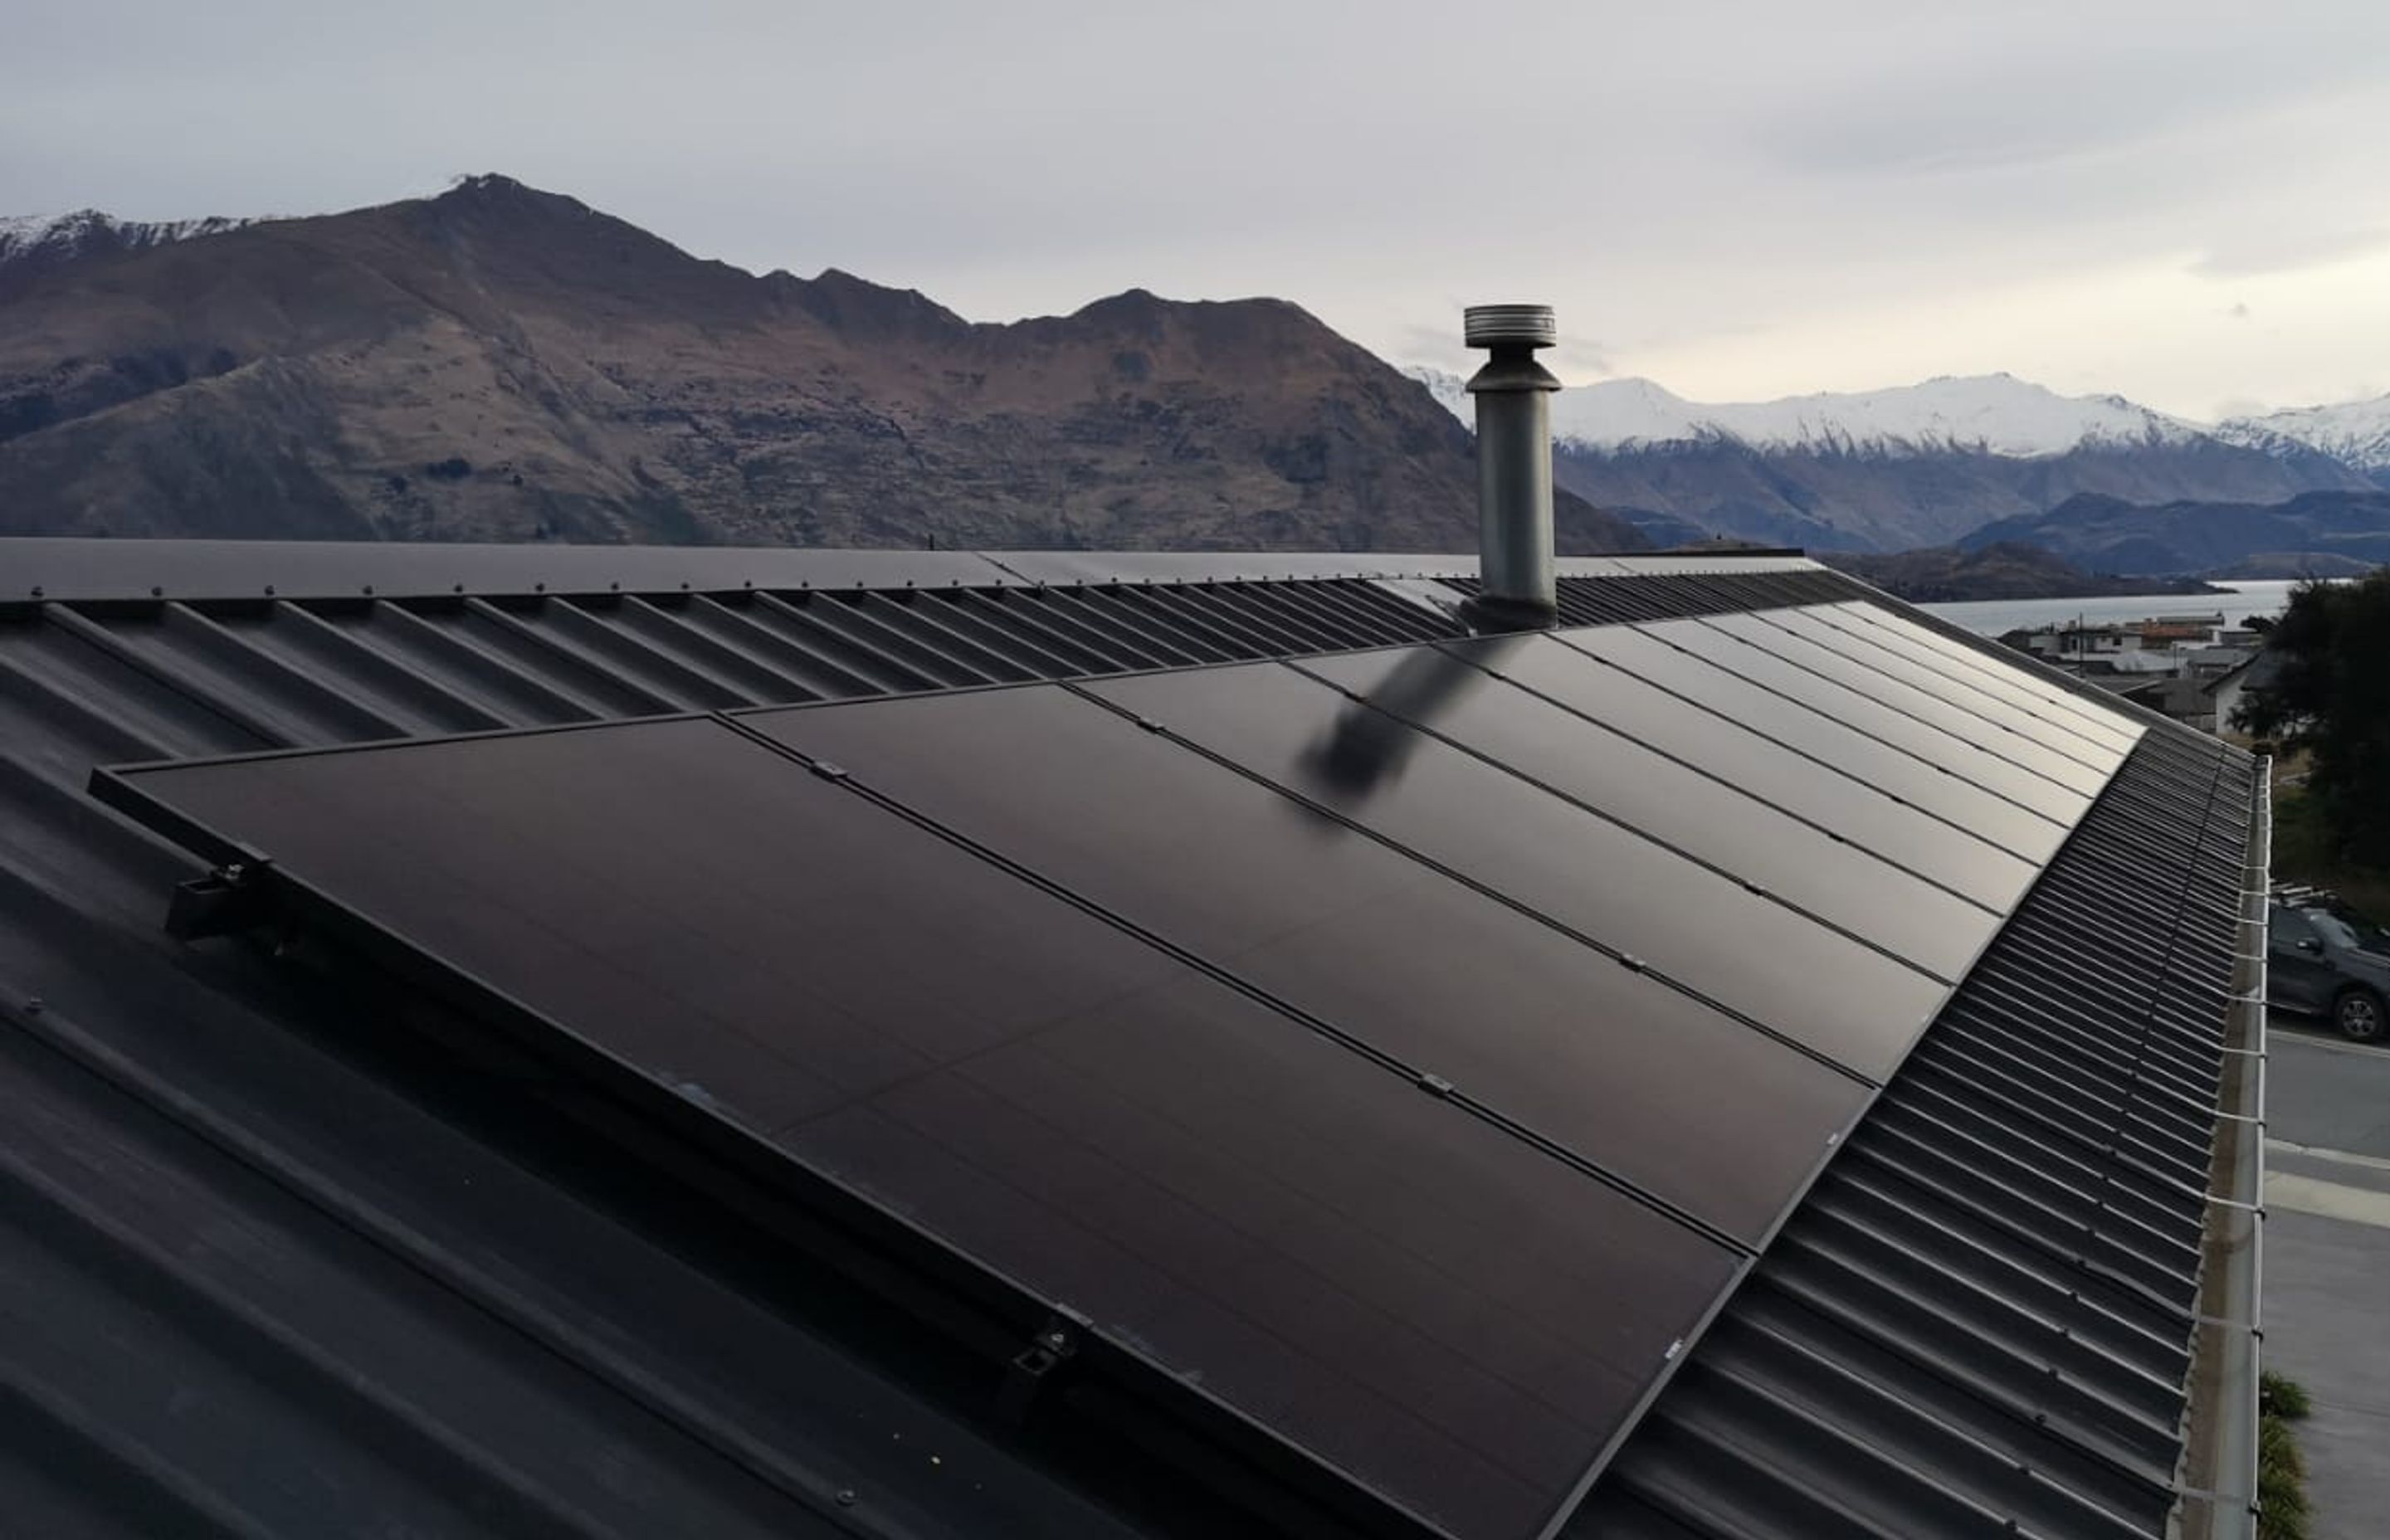 Infinite Energy specifies solar panels by REC and Hyundai as both companies offer pure black panels, which create a more streamlined aesthetic in line with modern architecture.